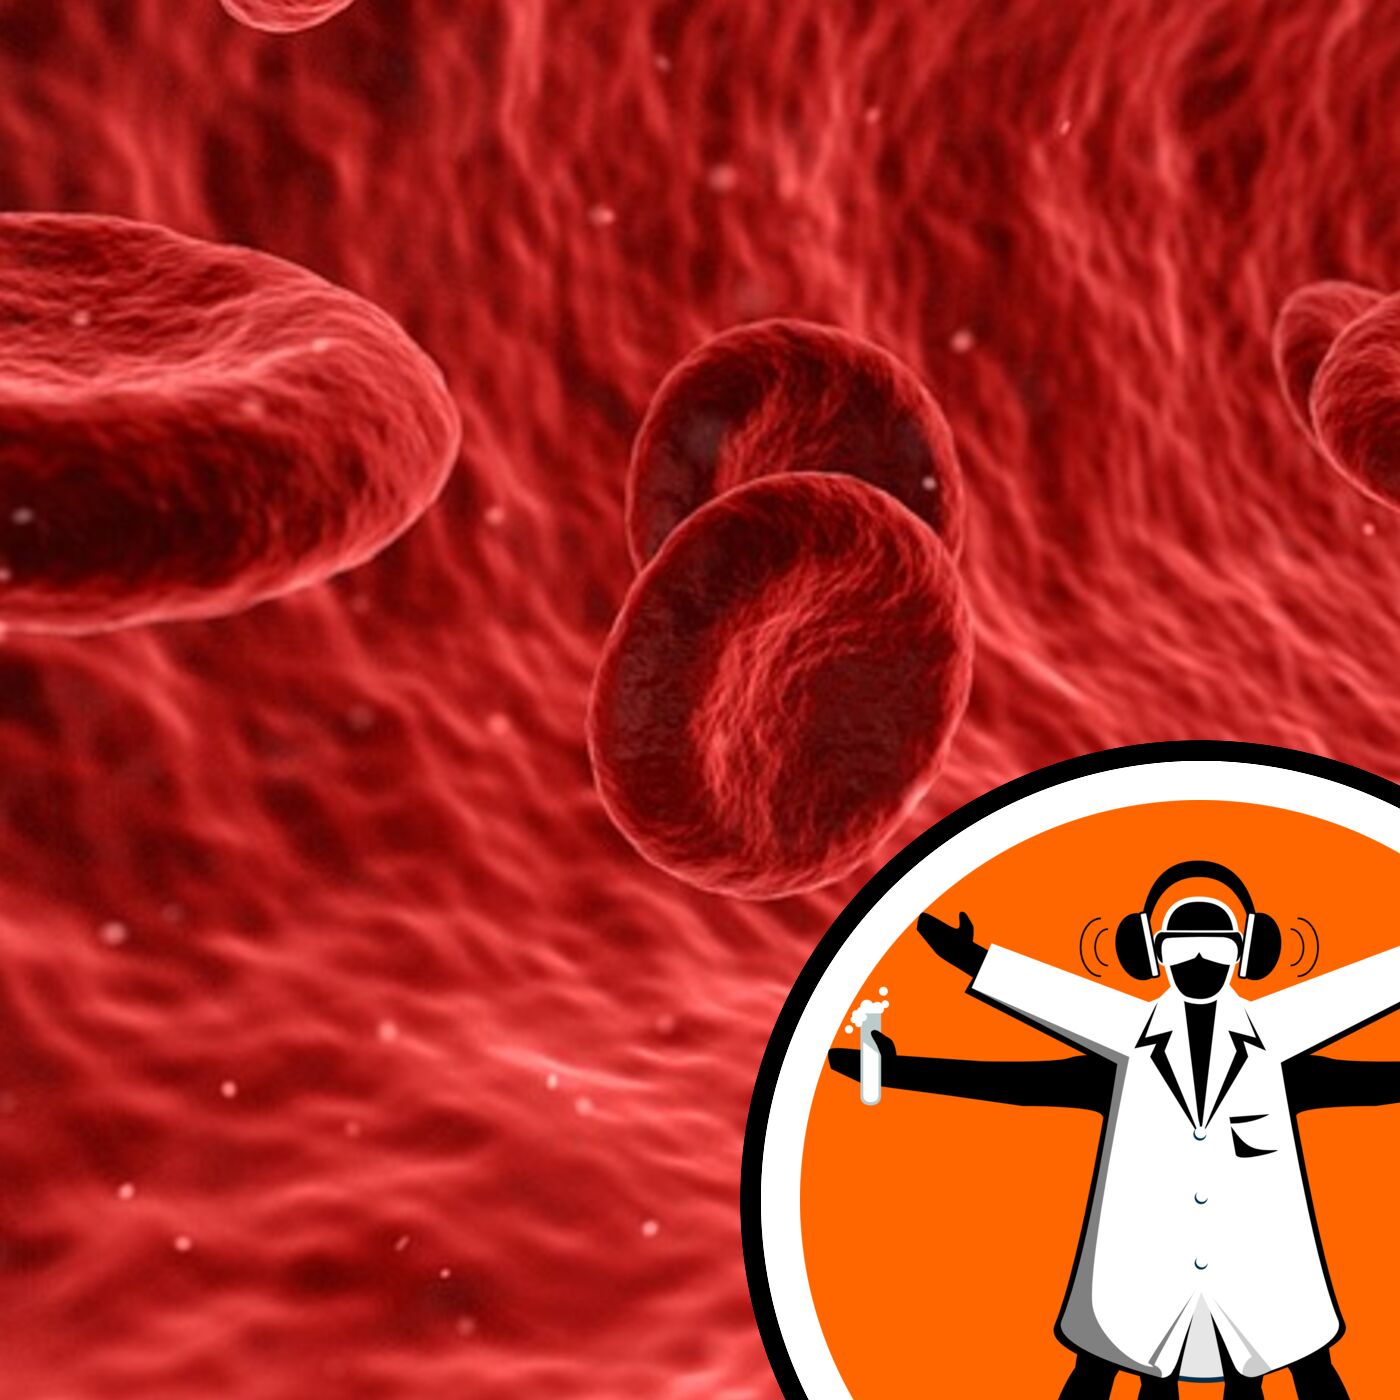 Automating Blood Smears